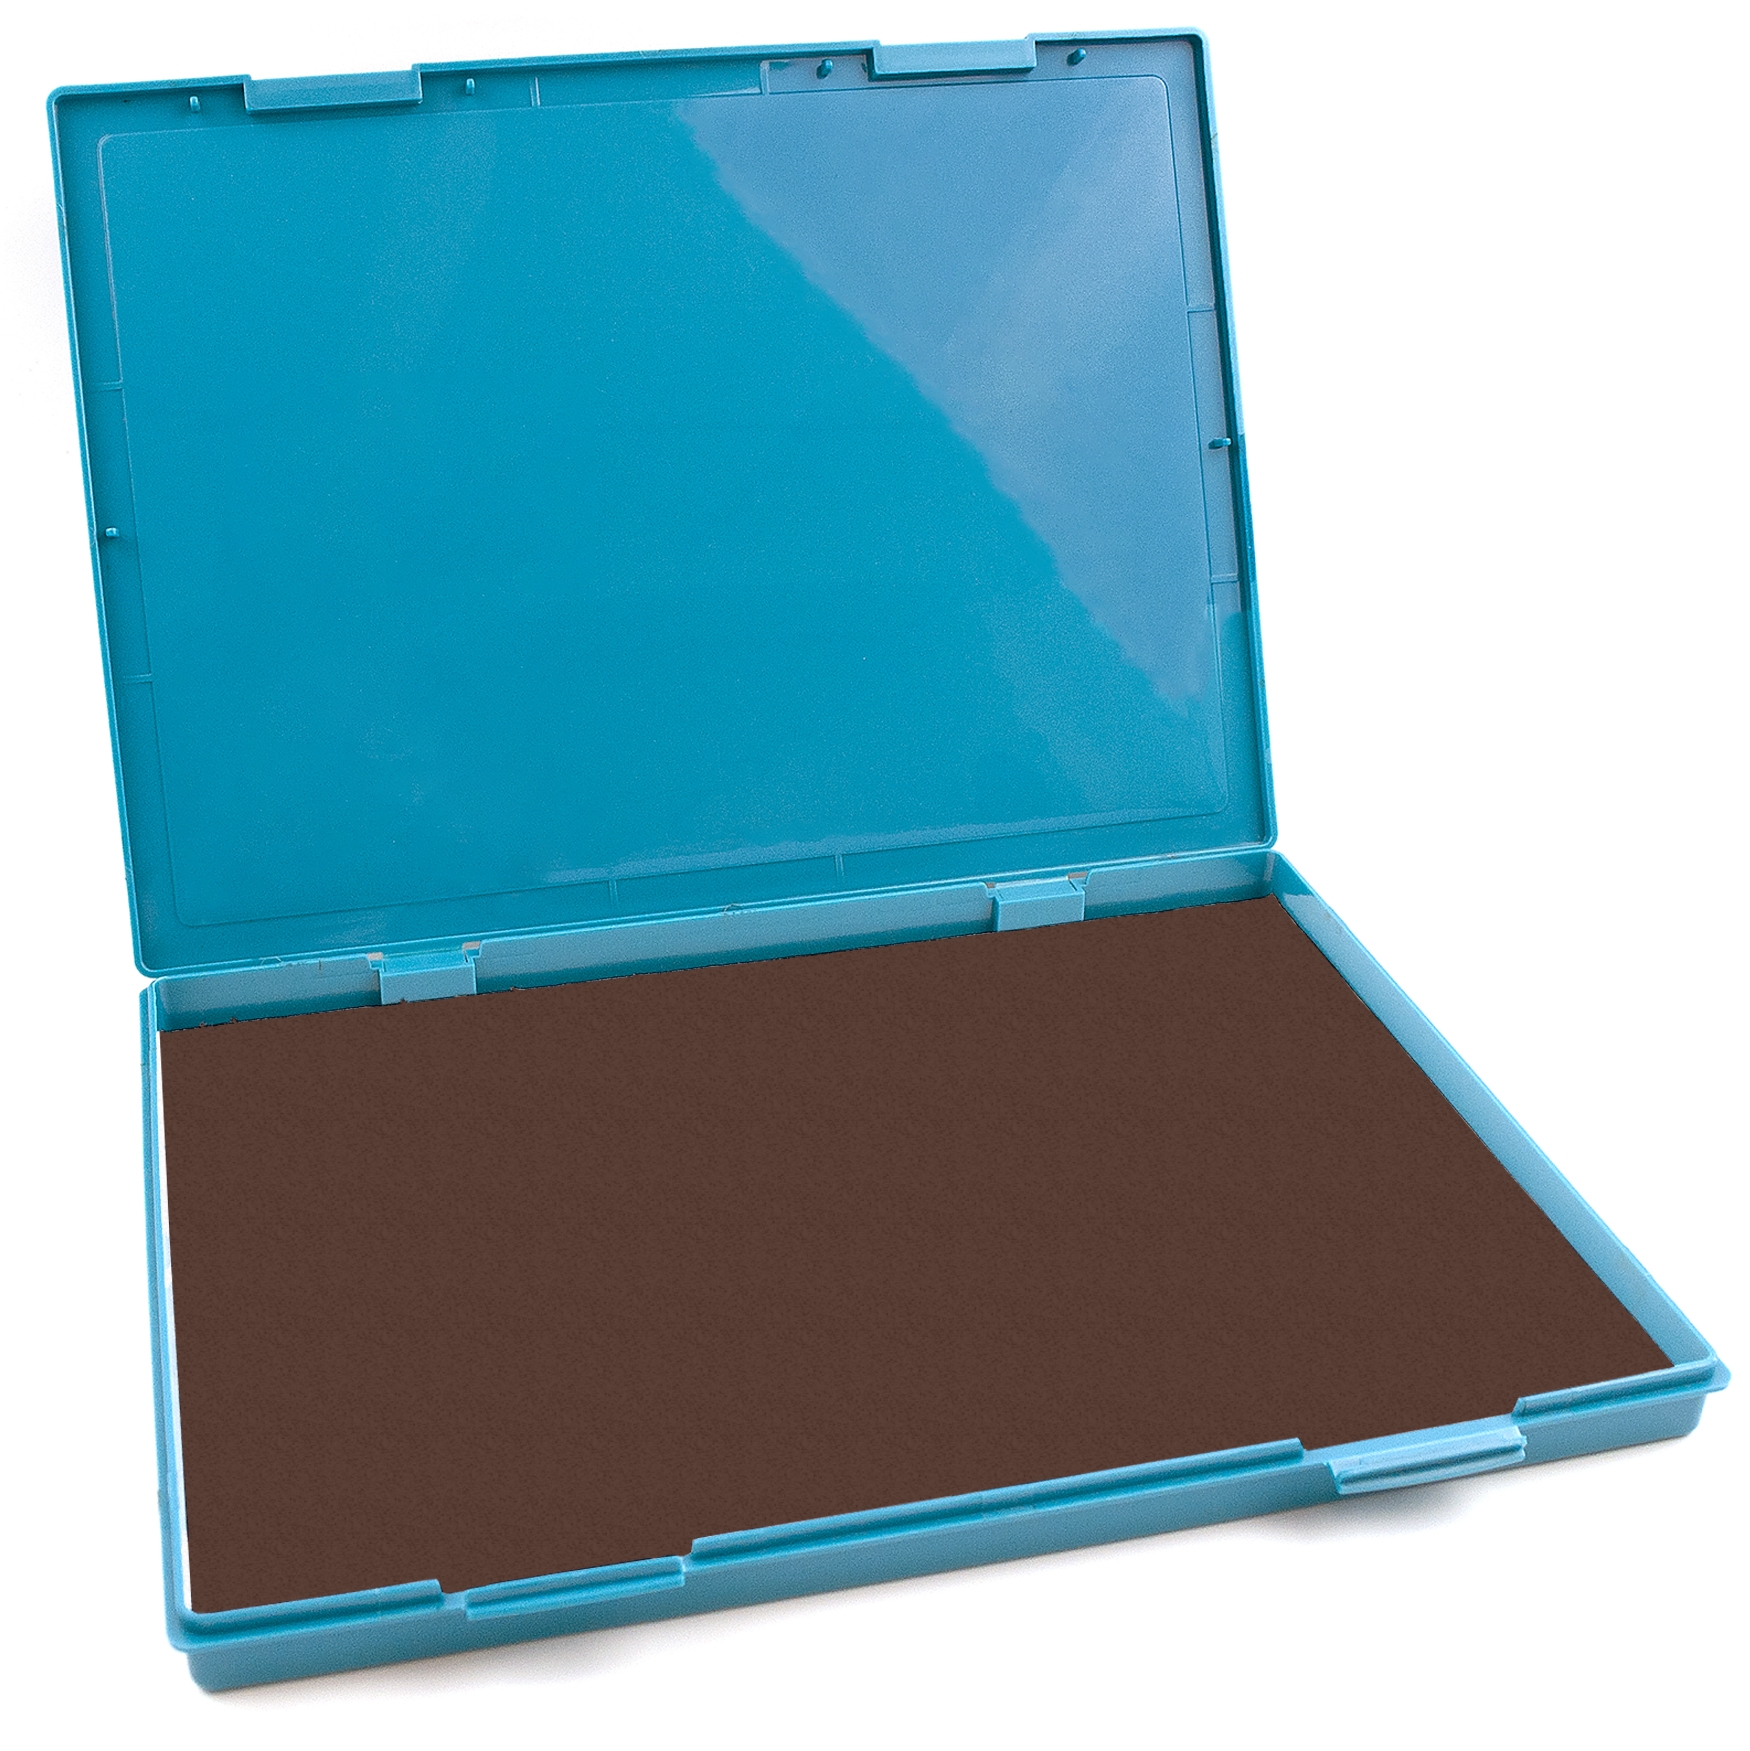 Extra Large BROWN Ink Stamp Pad - 8.25" x 11.5" - Industrial Felt Pad